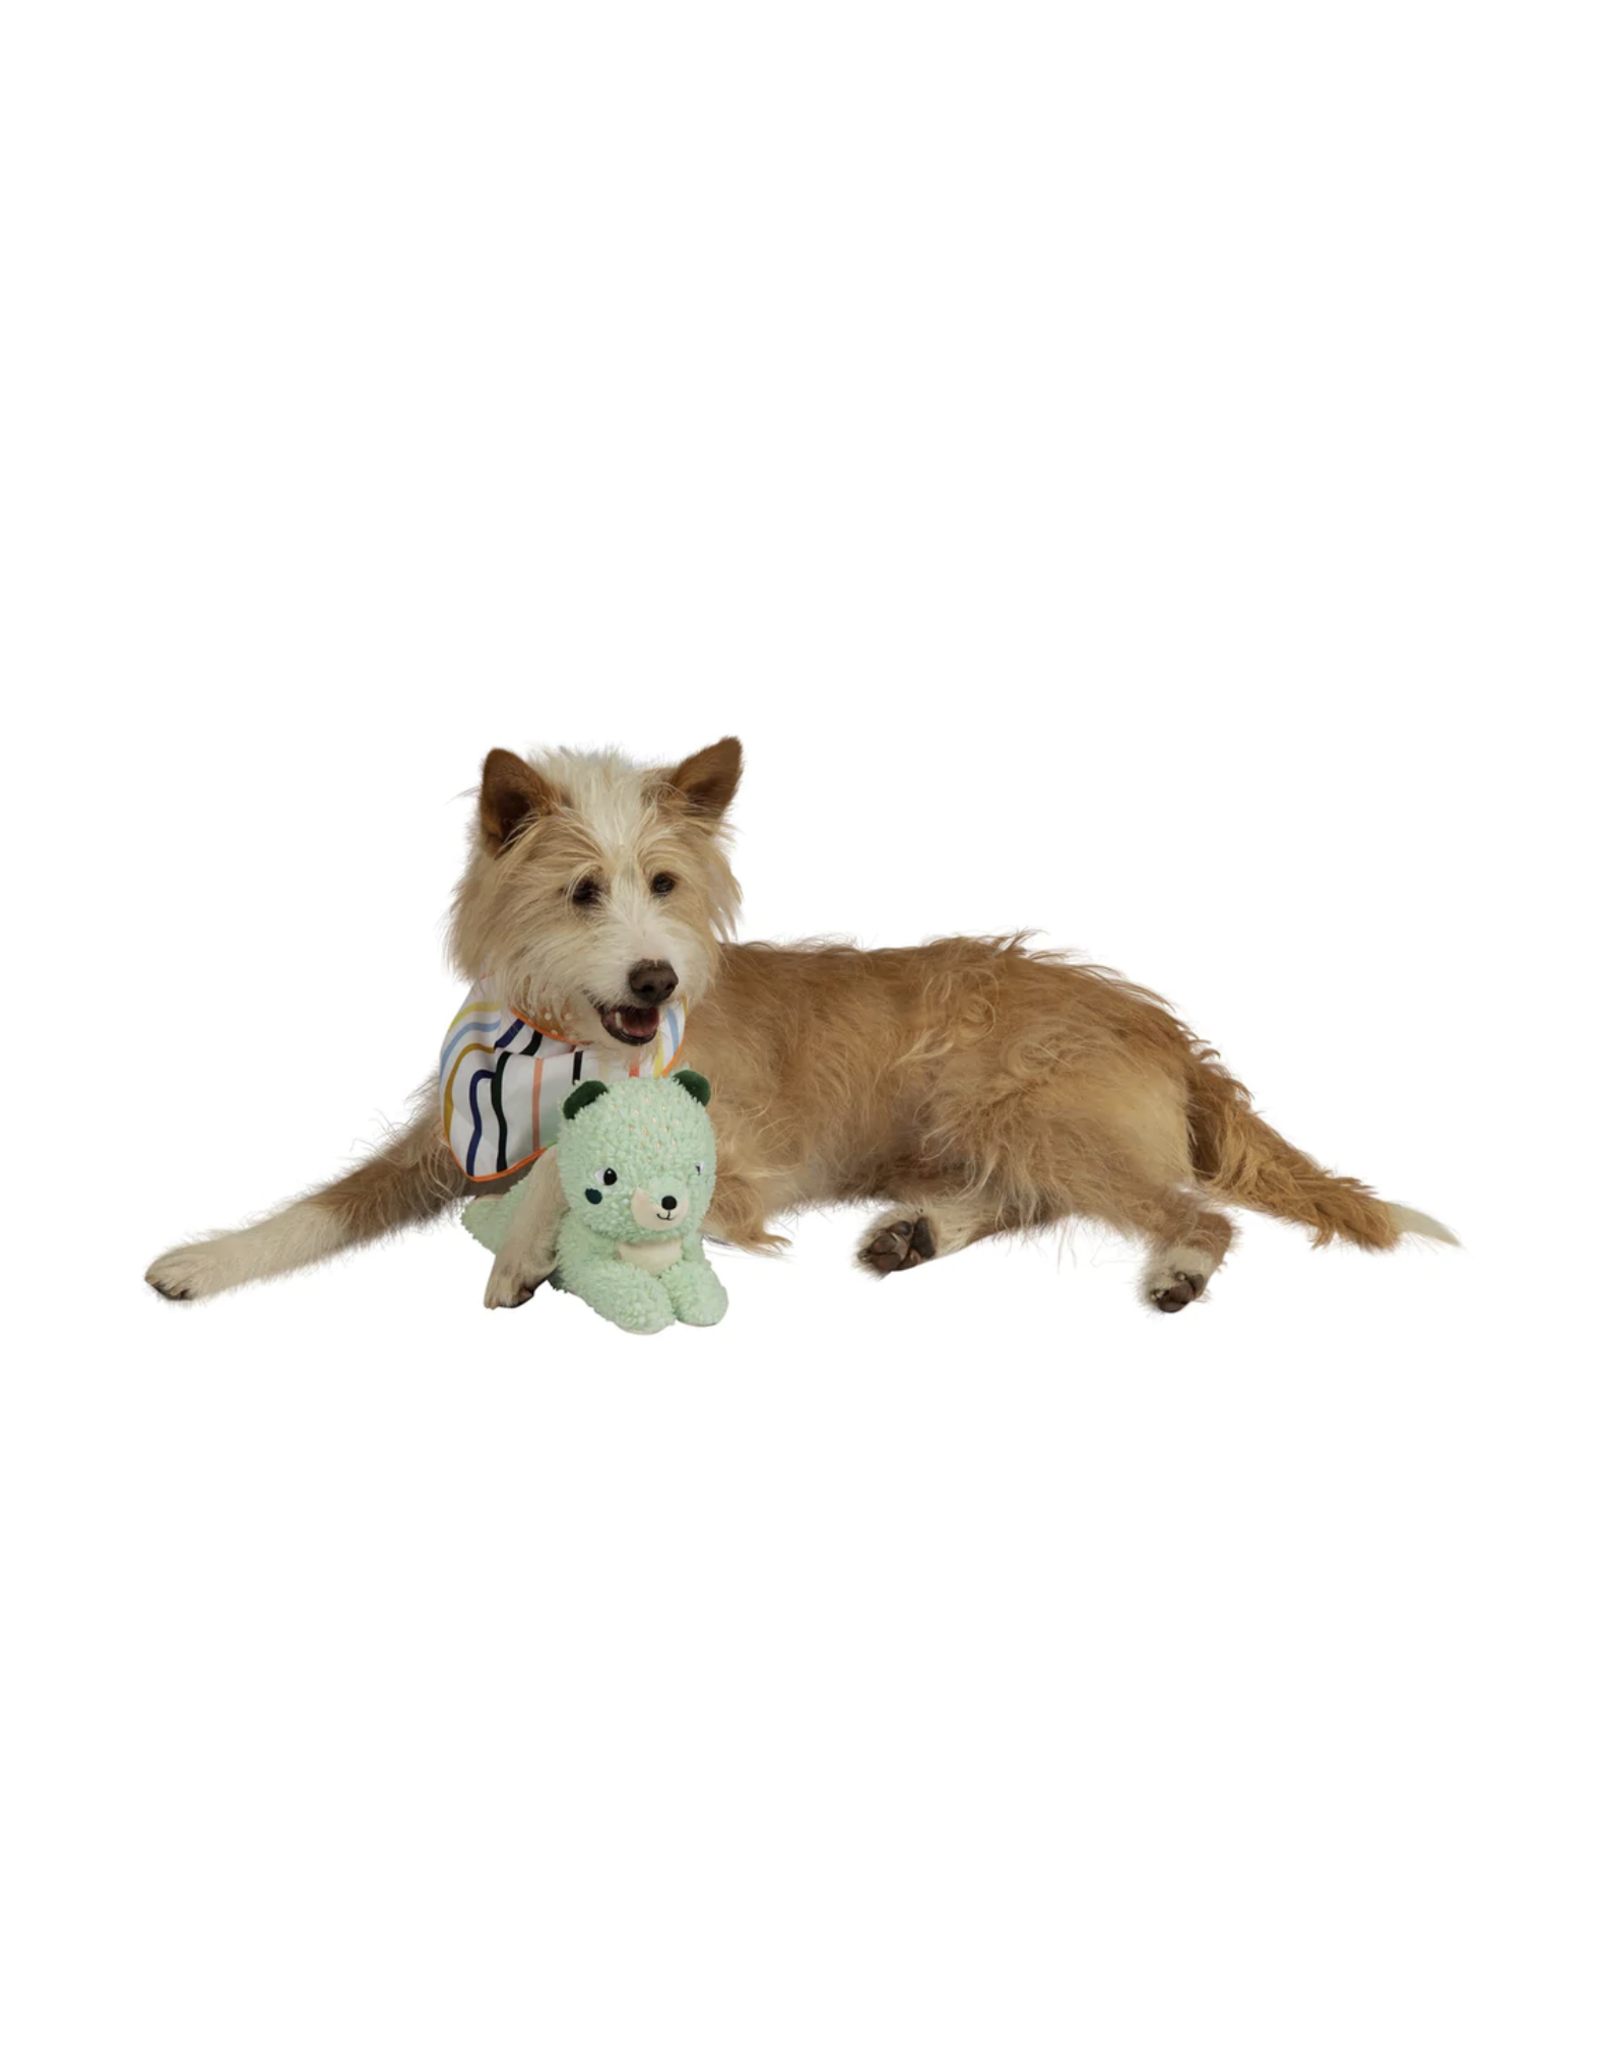 Squeaks a Lot Squirrel Dog Toy